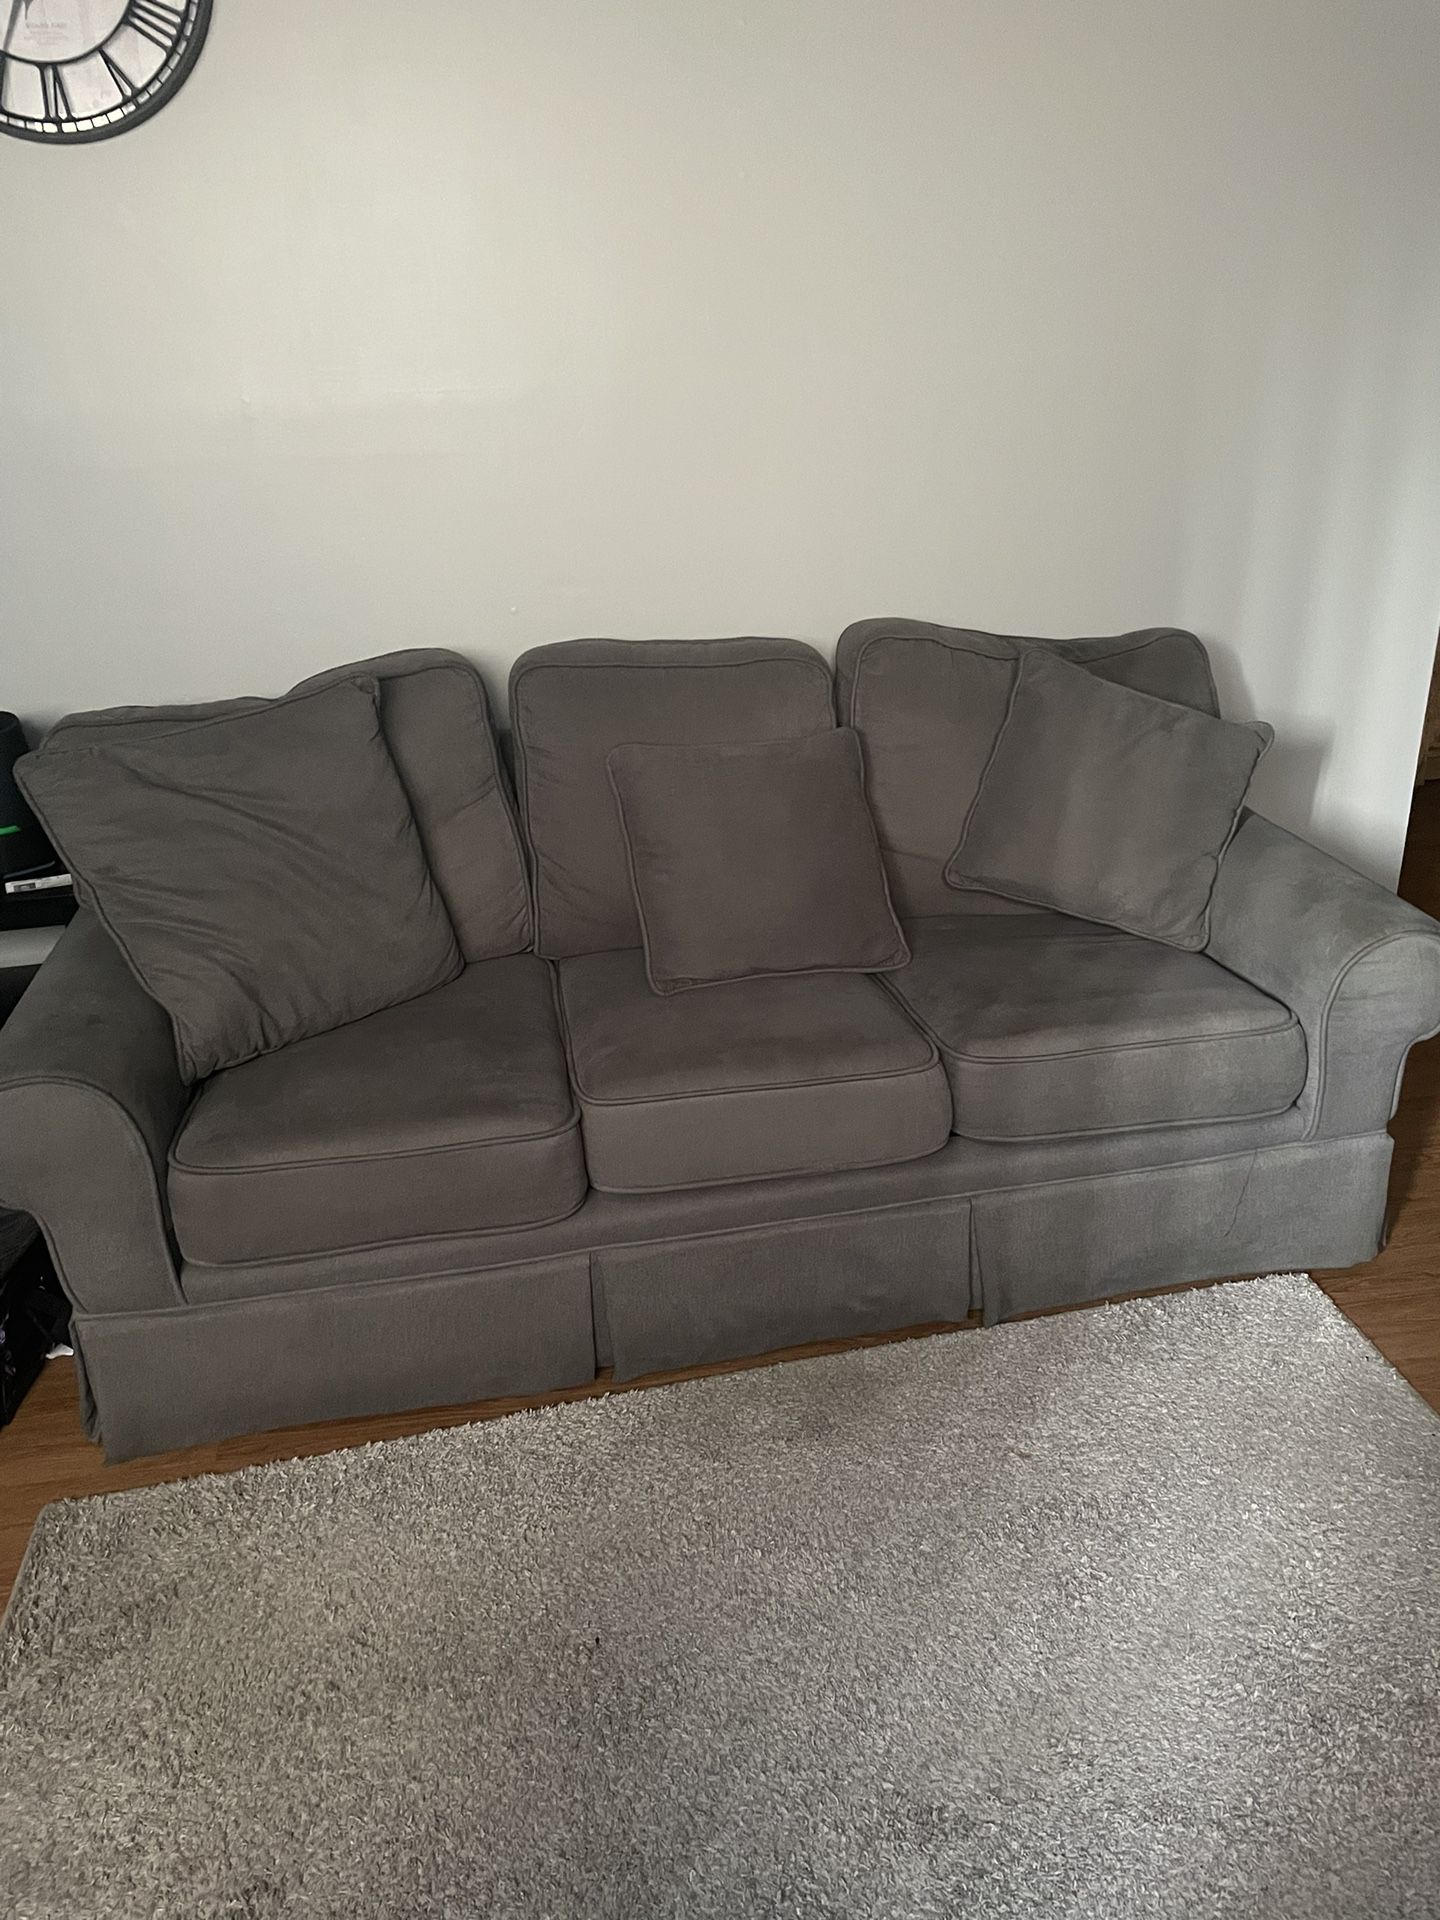 Full Size Pull Out Bed/ Couch